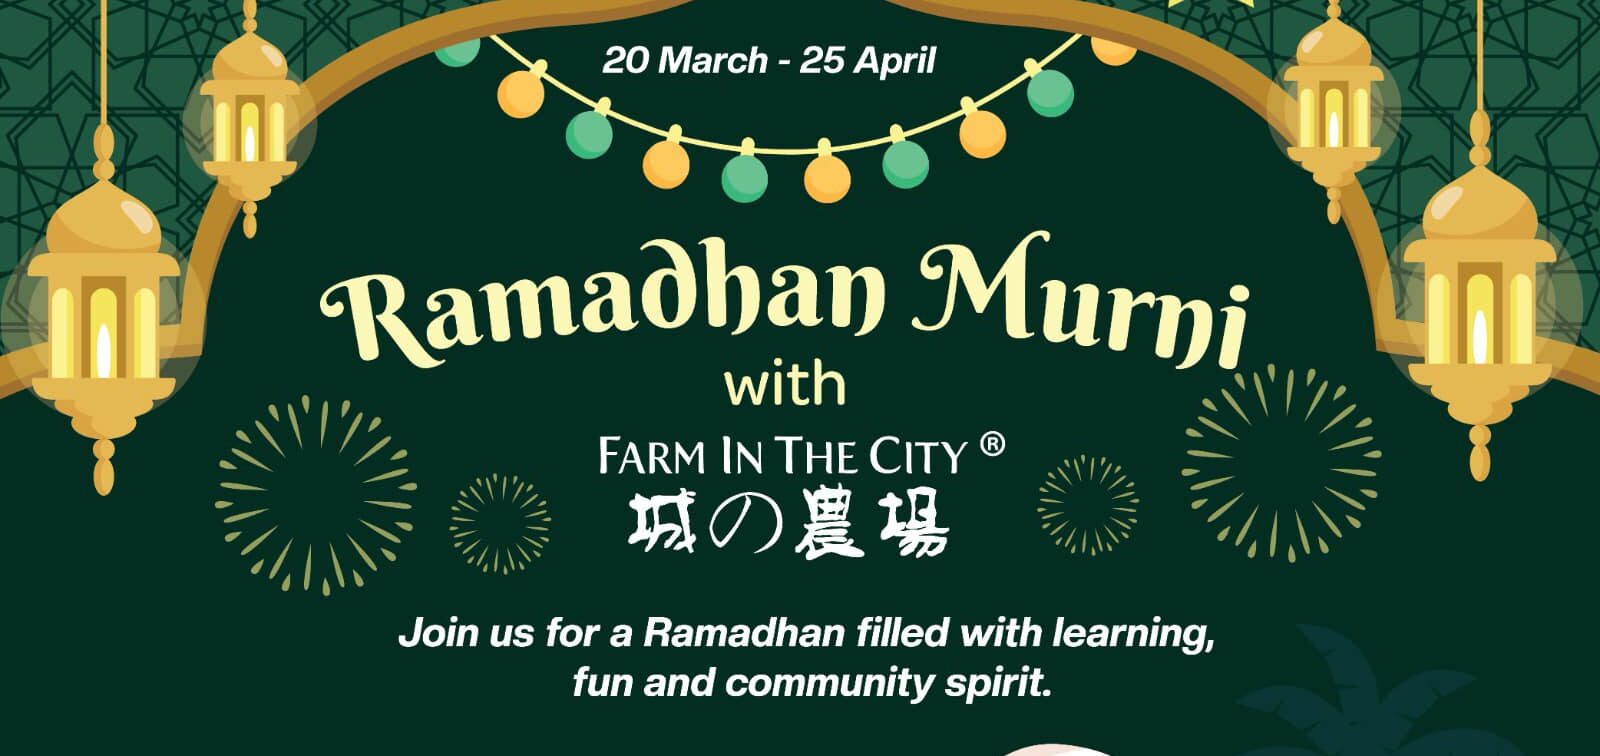 “𝗥𝗮𝗺𝗮𝗱𝗵𝗮𝗻 𝗠𝘂𝗿𝗻𝗶” at Farm In The City 城の农场!